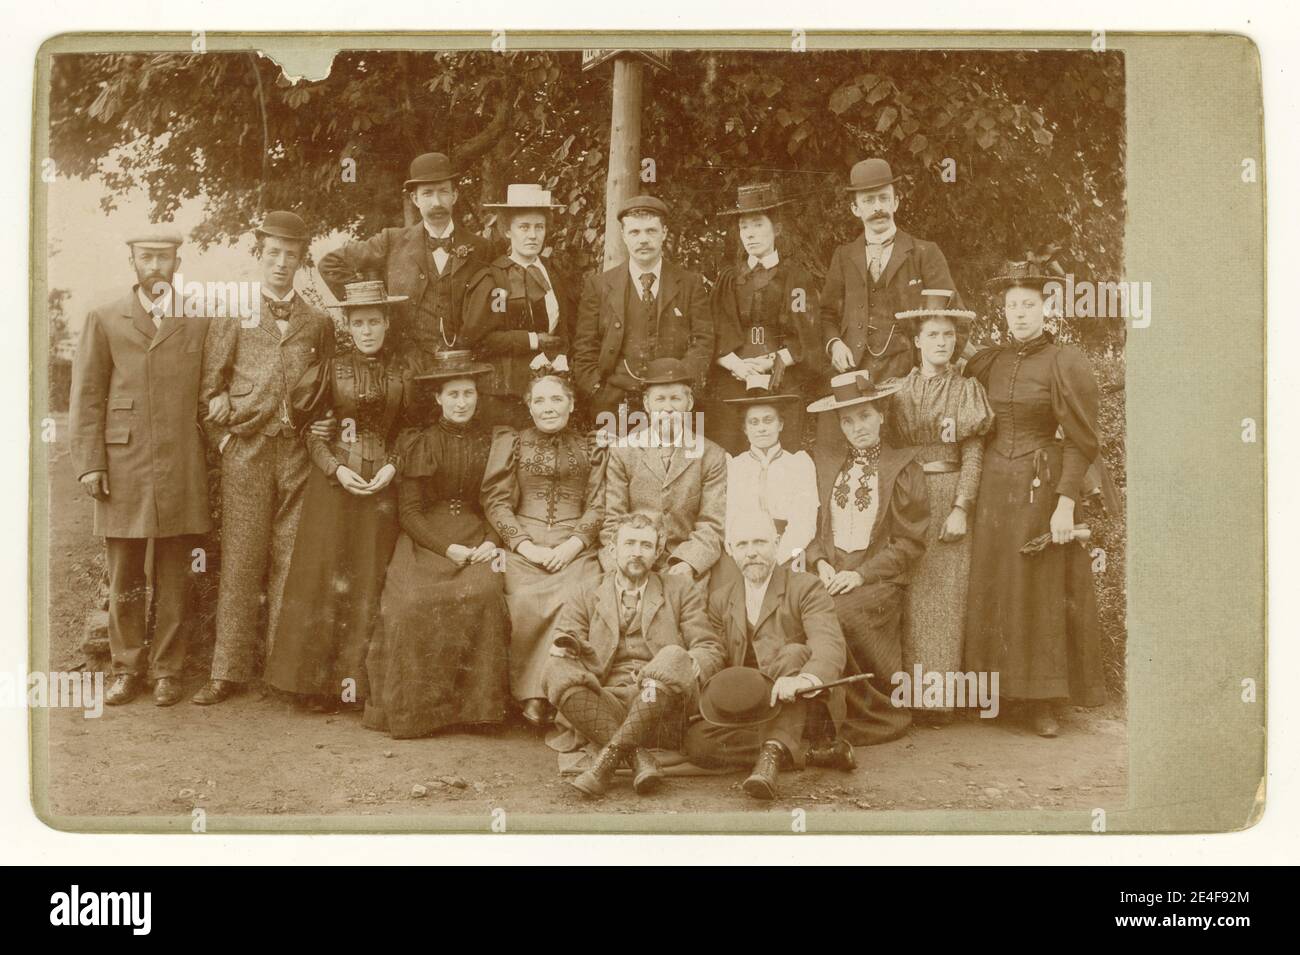 Original Victorian cabinet card full of characters and fashions. Here is John Baxter seated in the centre probably with his wife on the left dressed in her finest, surrounded by a group of his factory workers, dressed in their 'Sunday Best' clothes, perhaps on a company outing or country walk, circa 1897, U.K Stock Photo